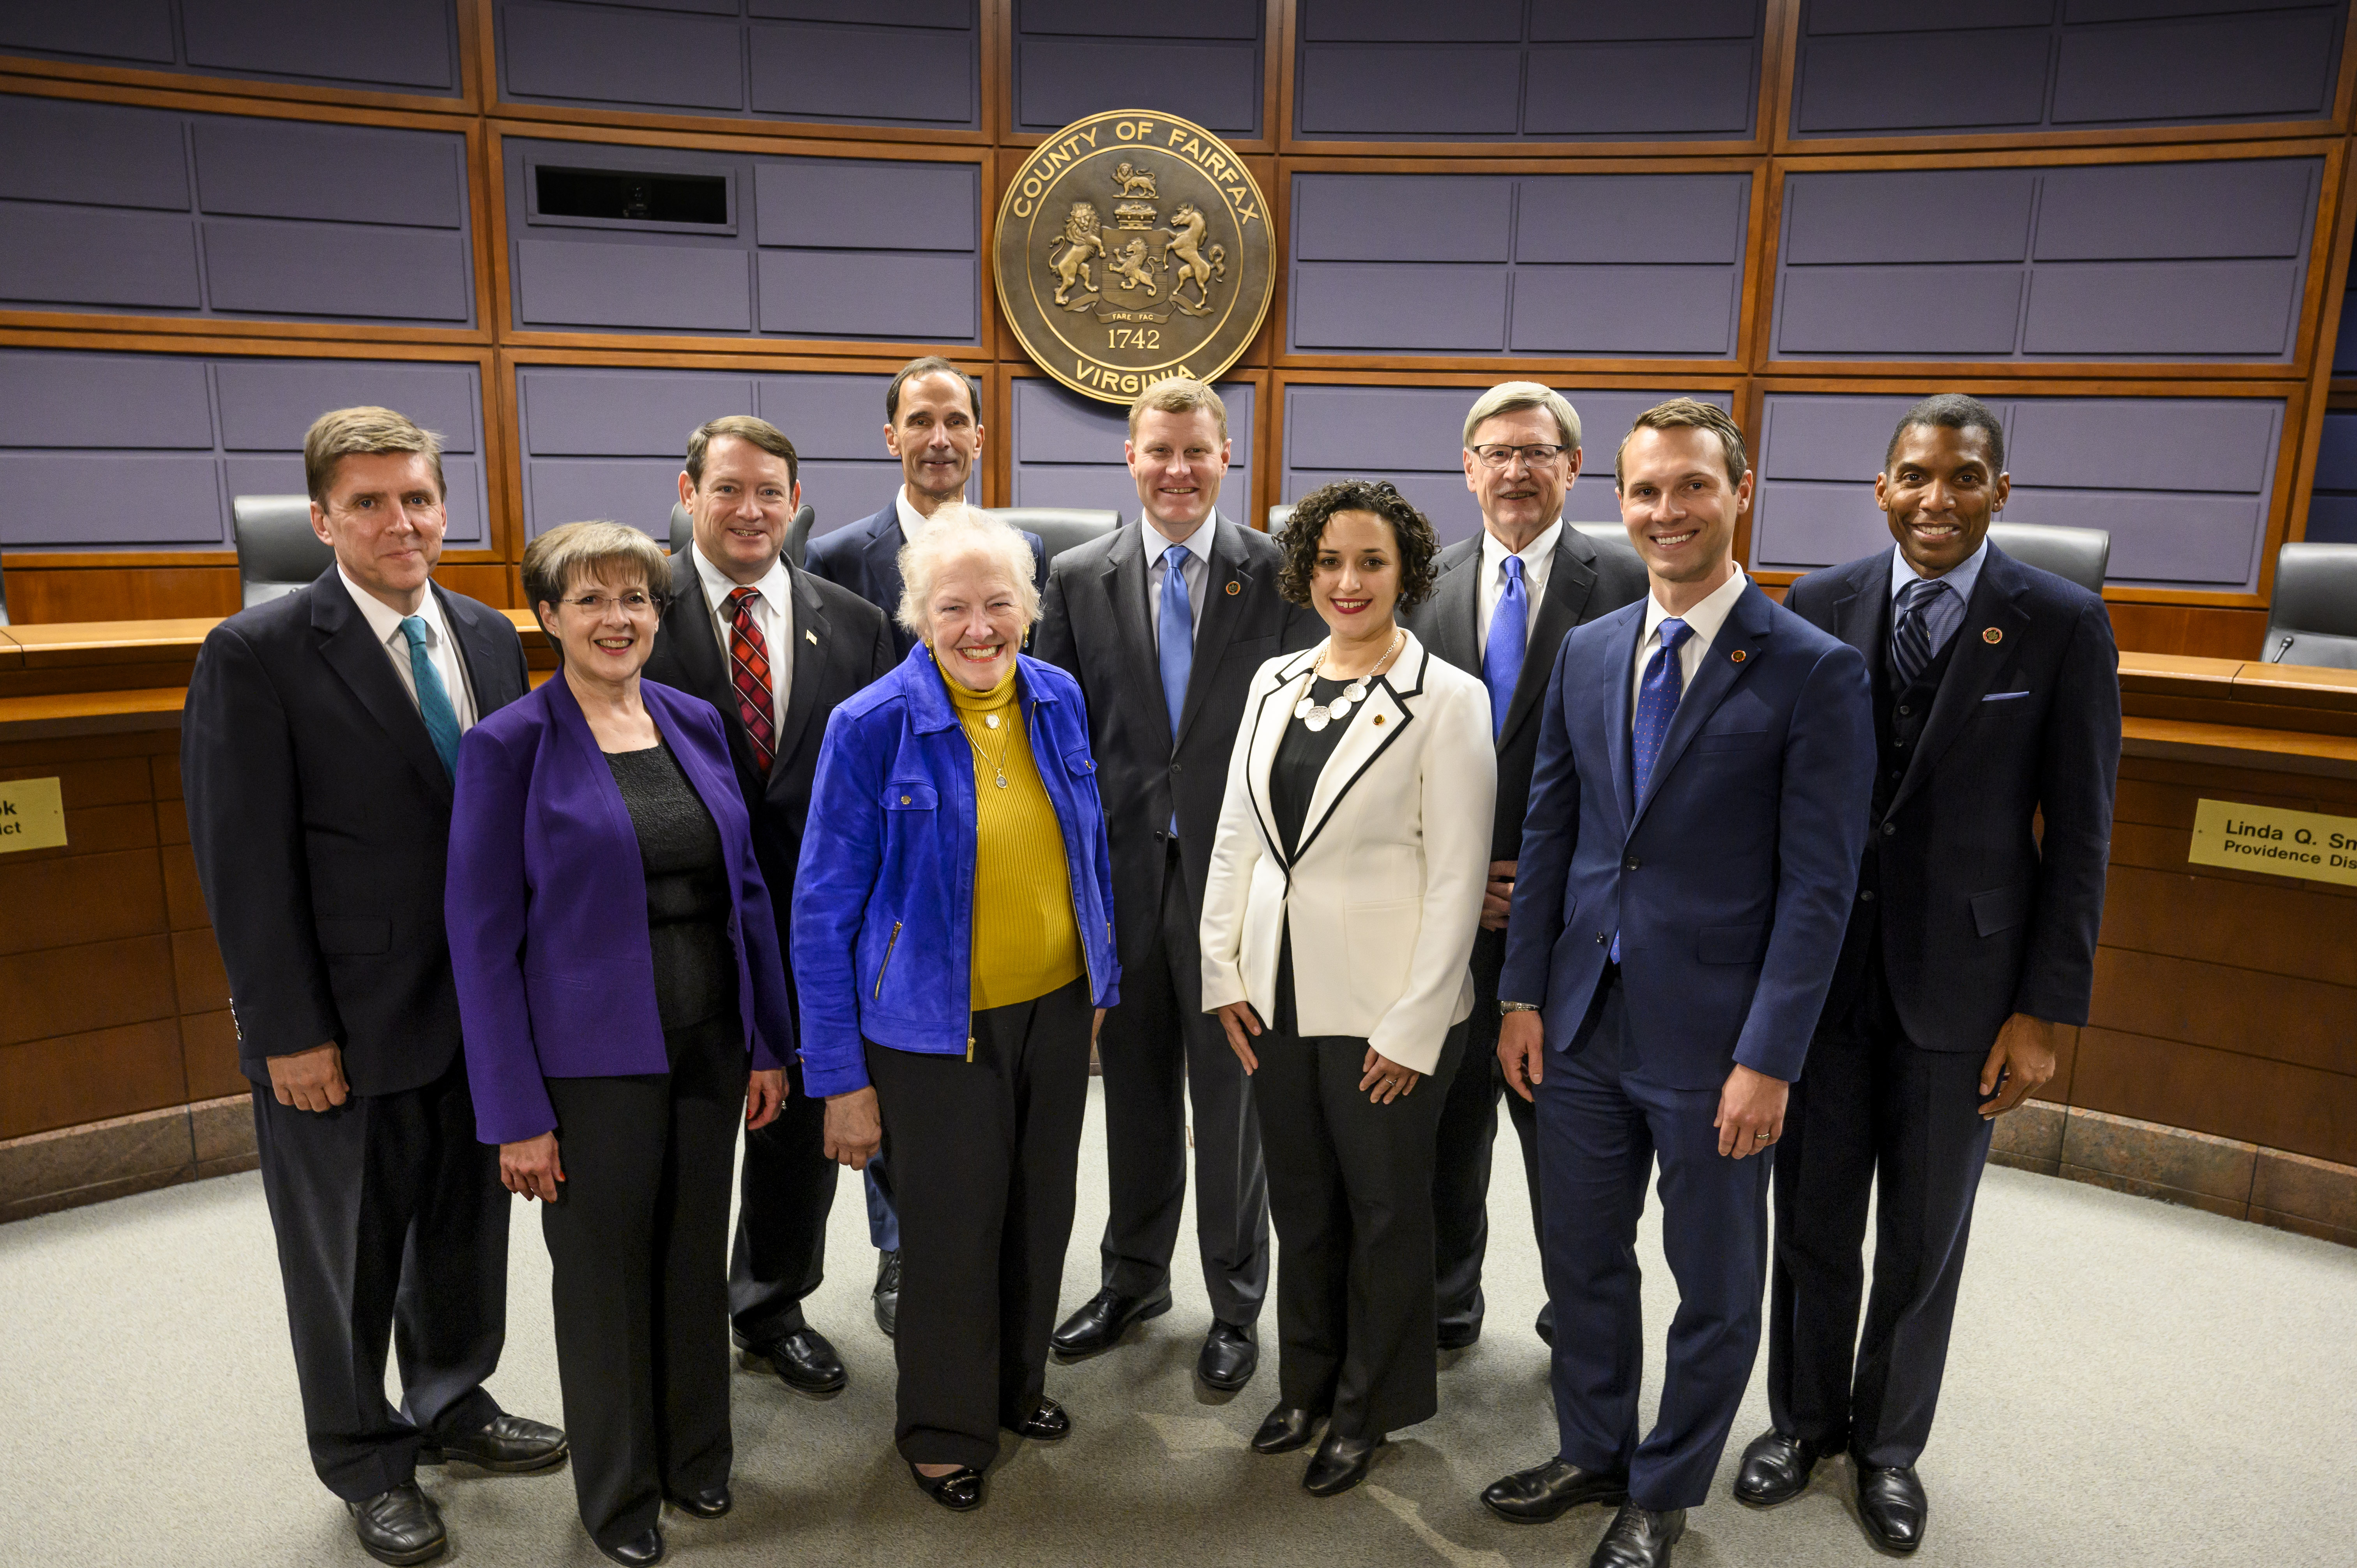 Board of Supervisors group photo with the County Executive